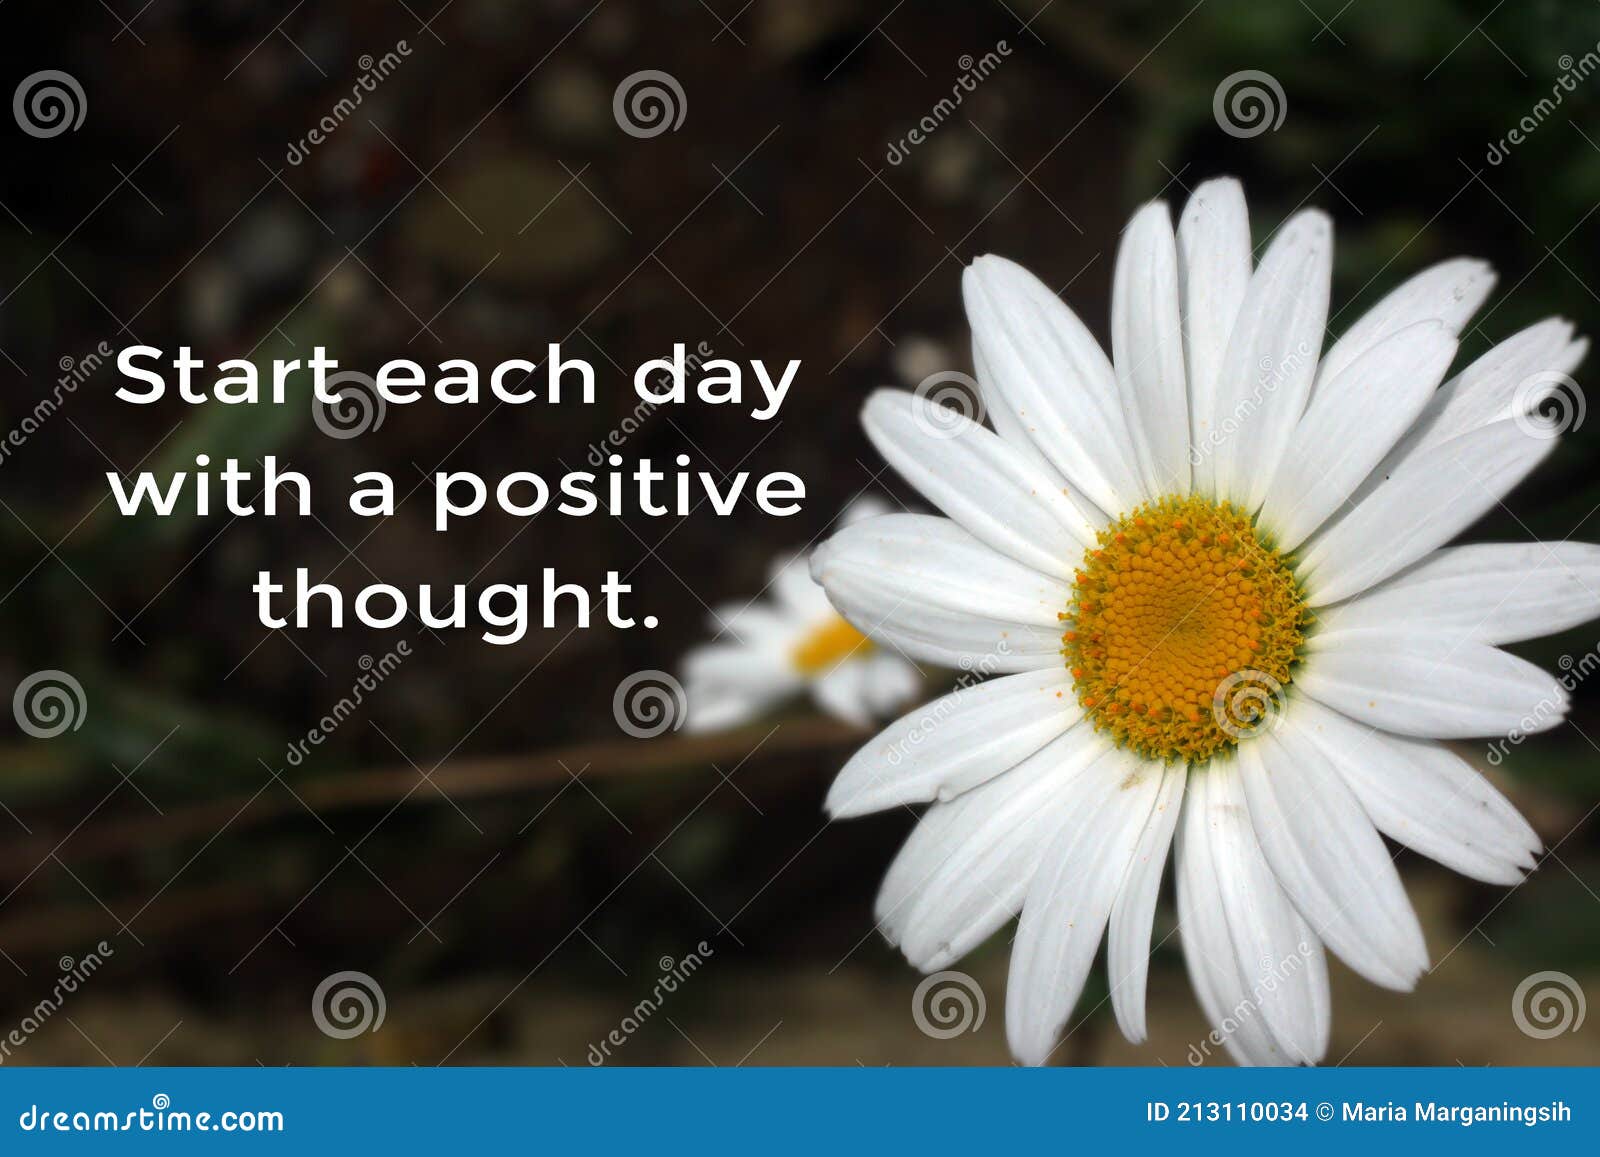 Inspirational Words - Start Each Day with a Positive Thought. Business ...